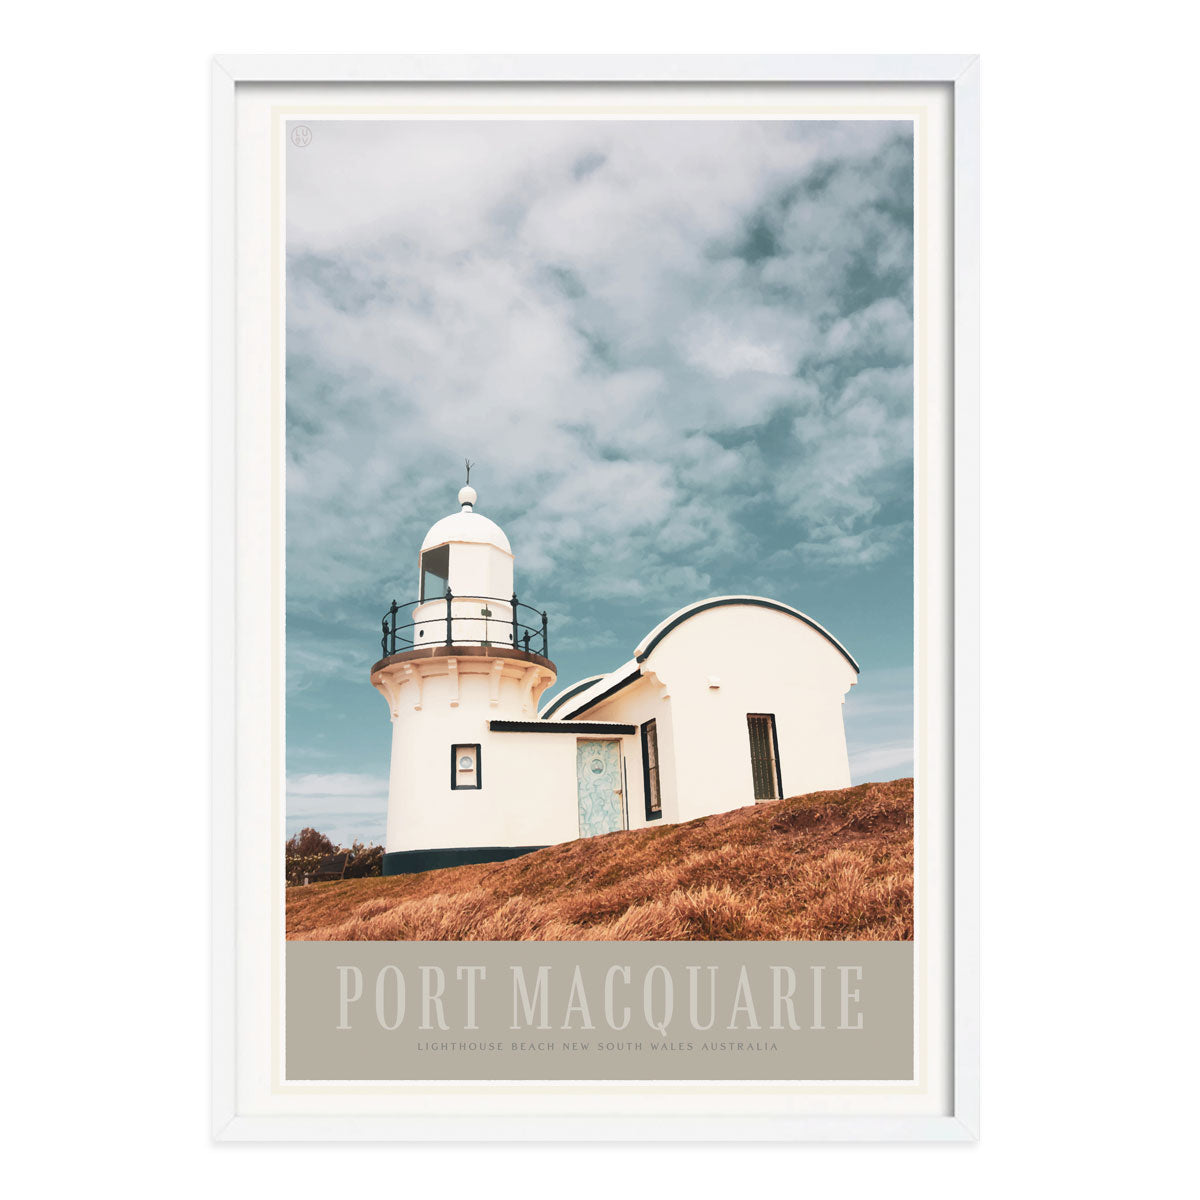 Port Macquarie NSW vintage retro travel poster print in white frame from Places We Luv